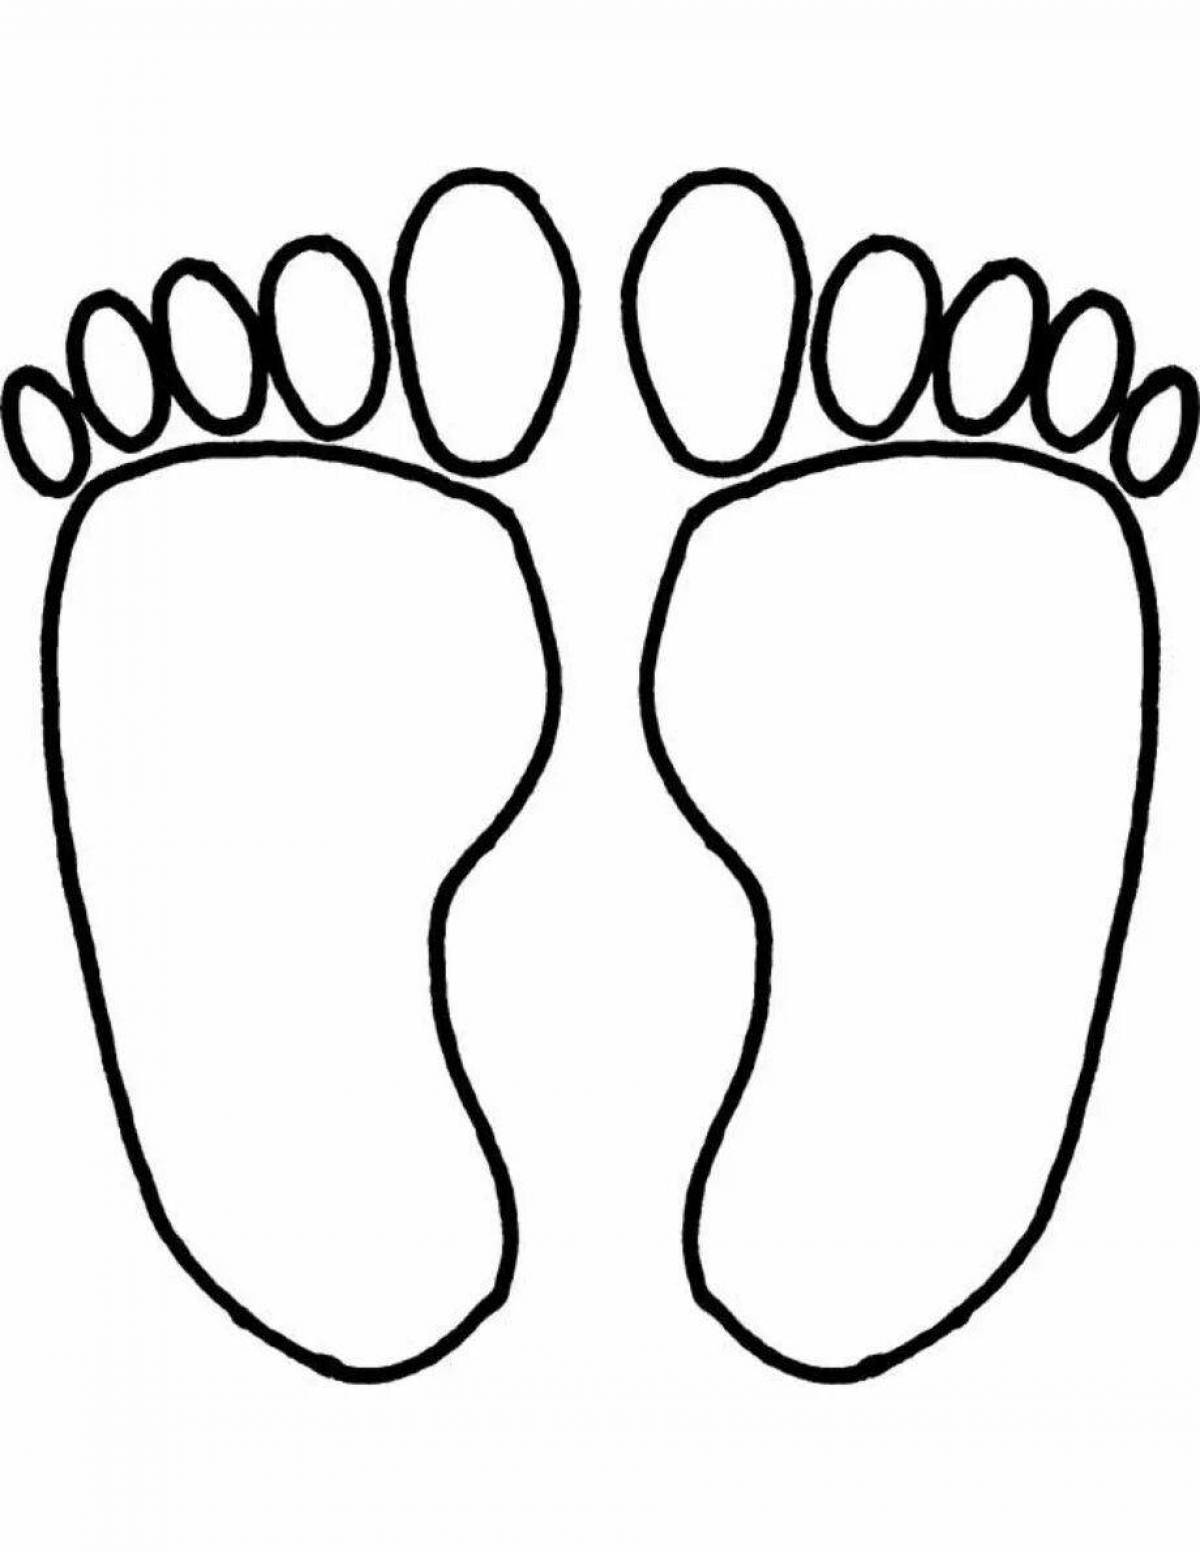 Adorable footprints coloring book for kids